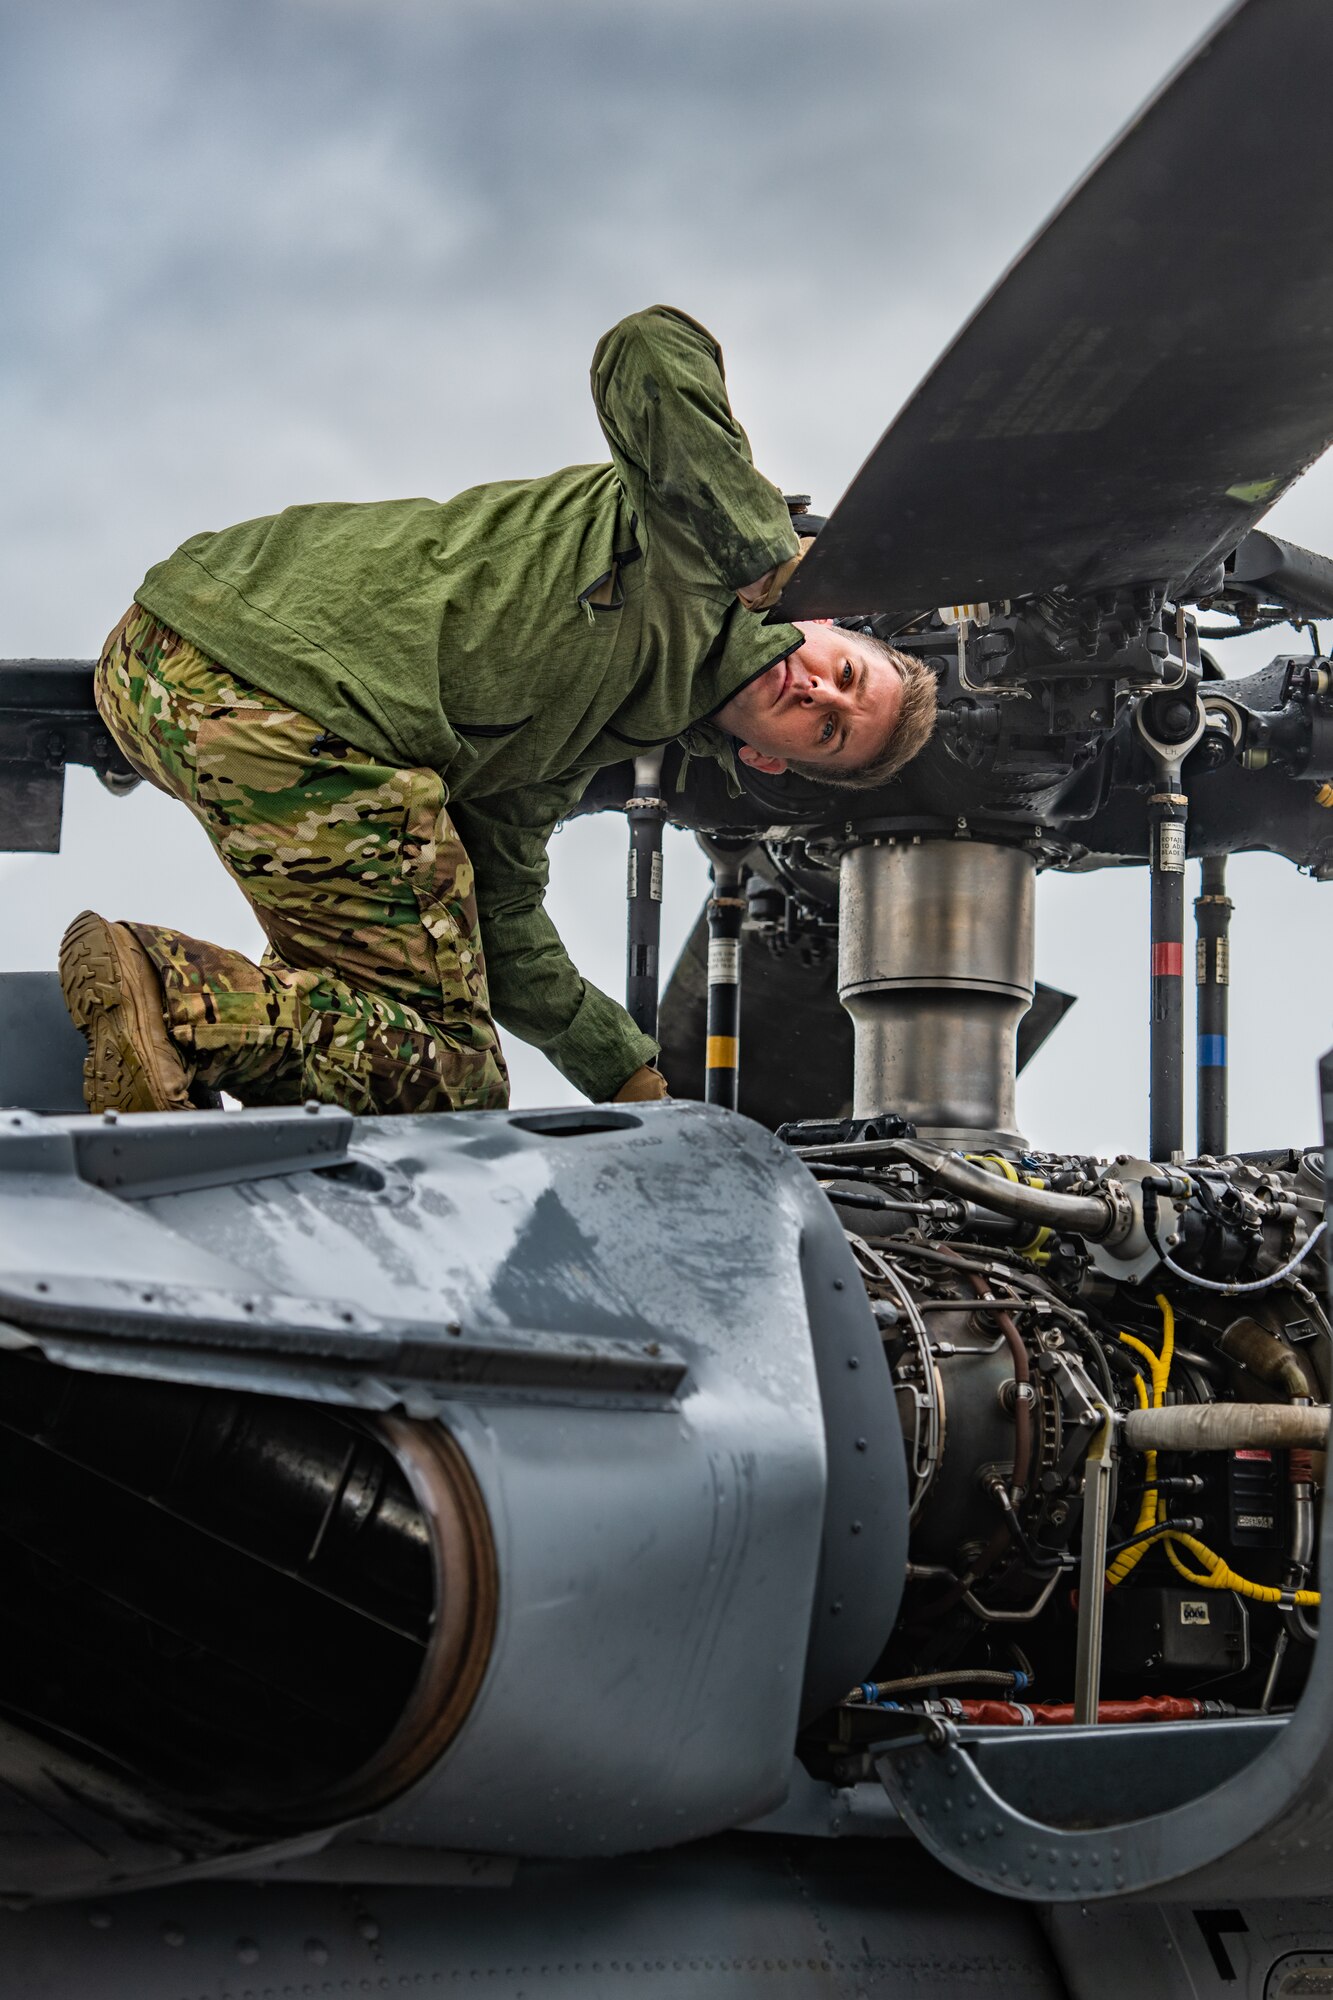 A U.S. Air Force member checks the main rotor of a helicopter